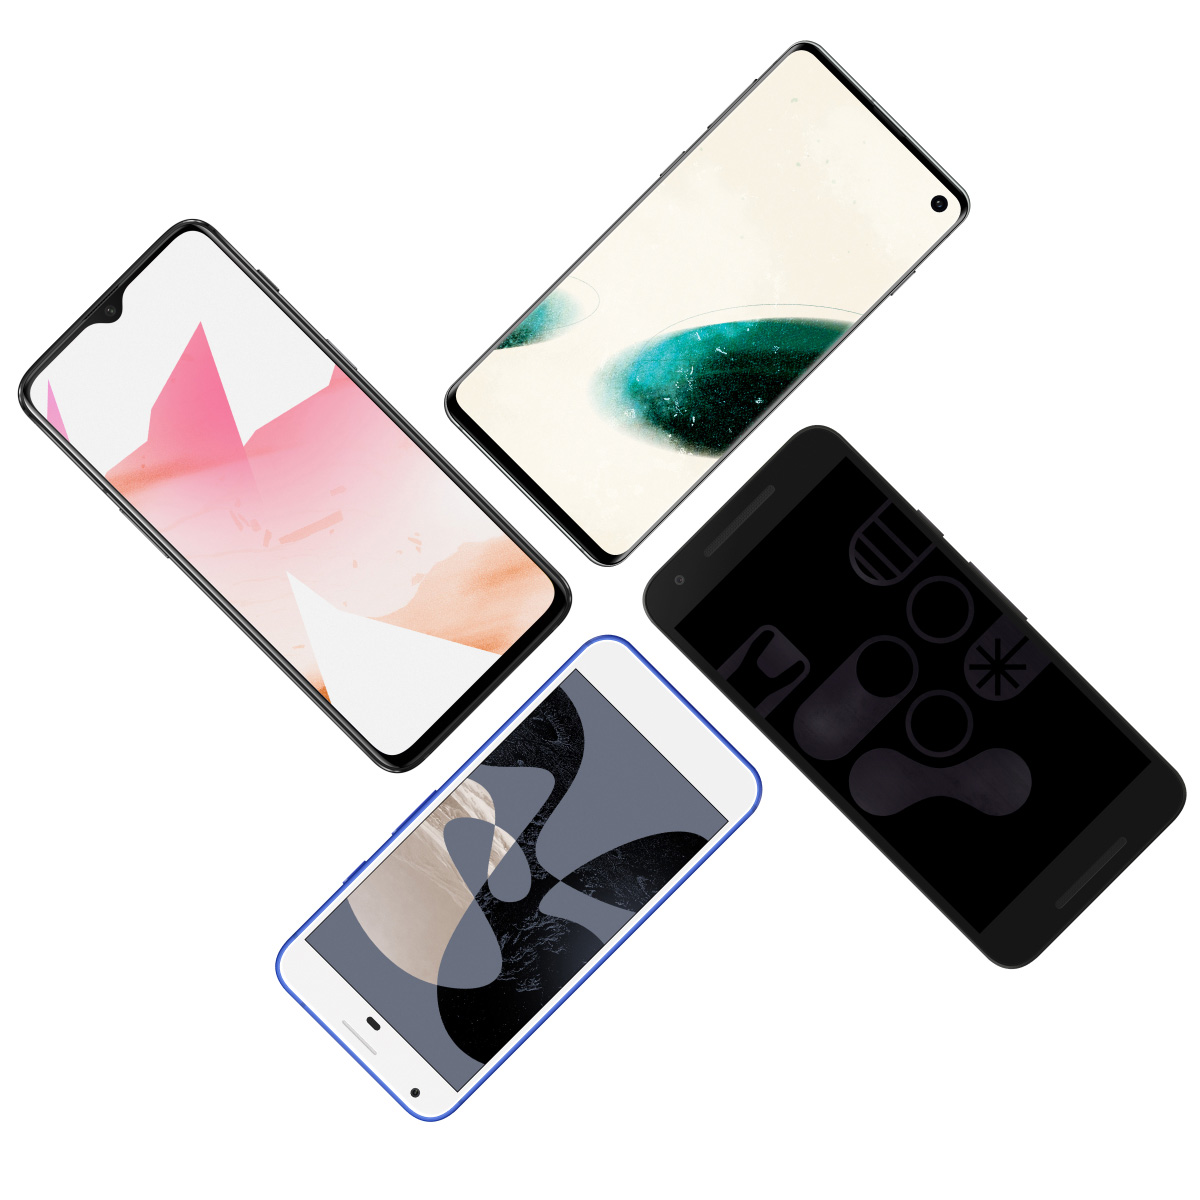 A pinwheel of four devices each showing Lineage wallpapers